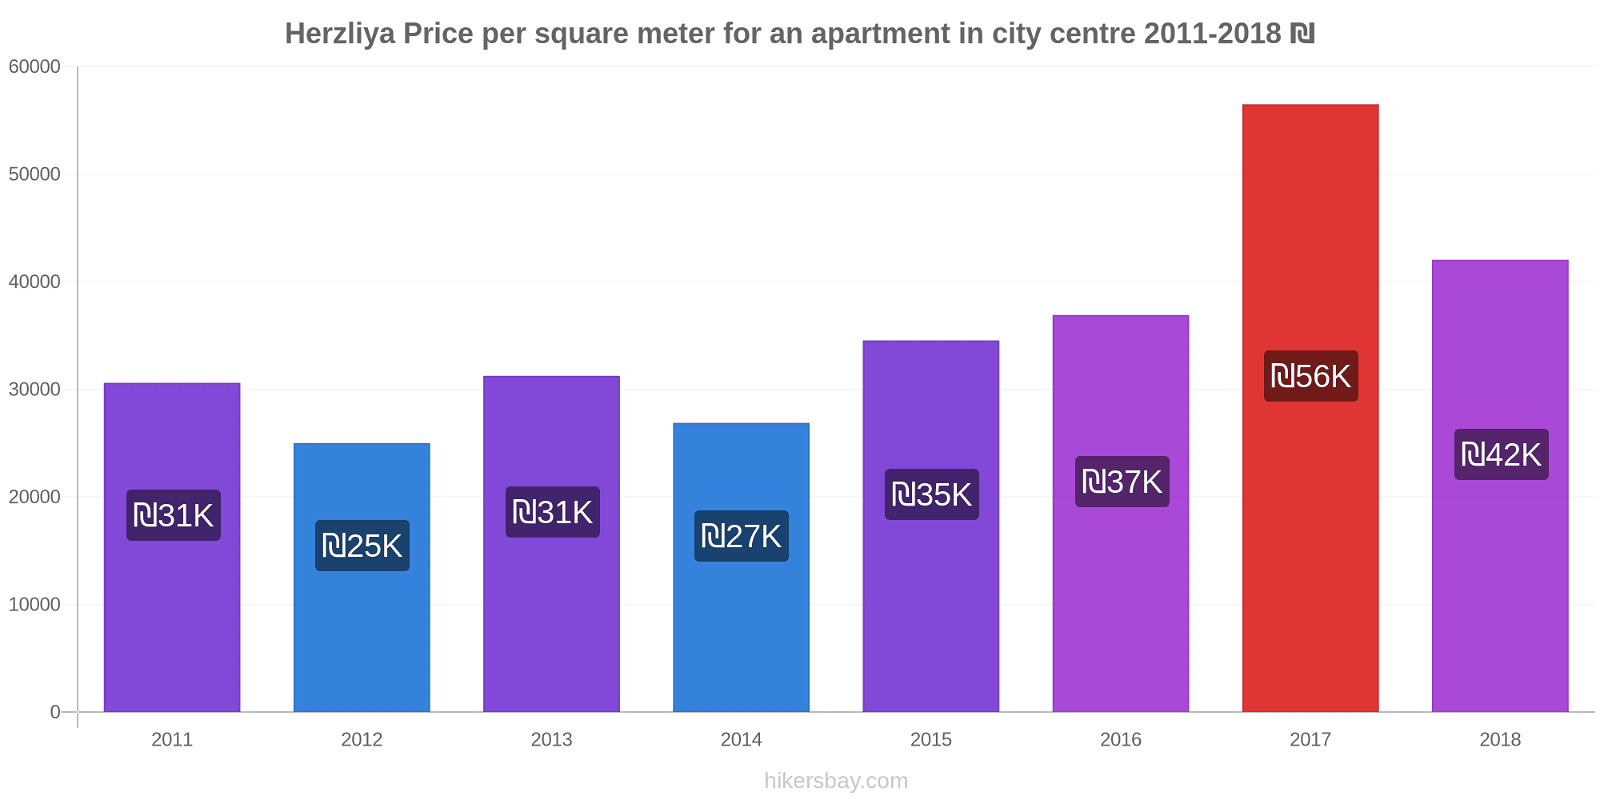 Herzliya price changes Price per square meter for an apartment in city centre hikersbay.com